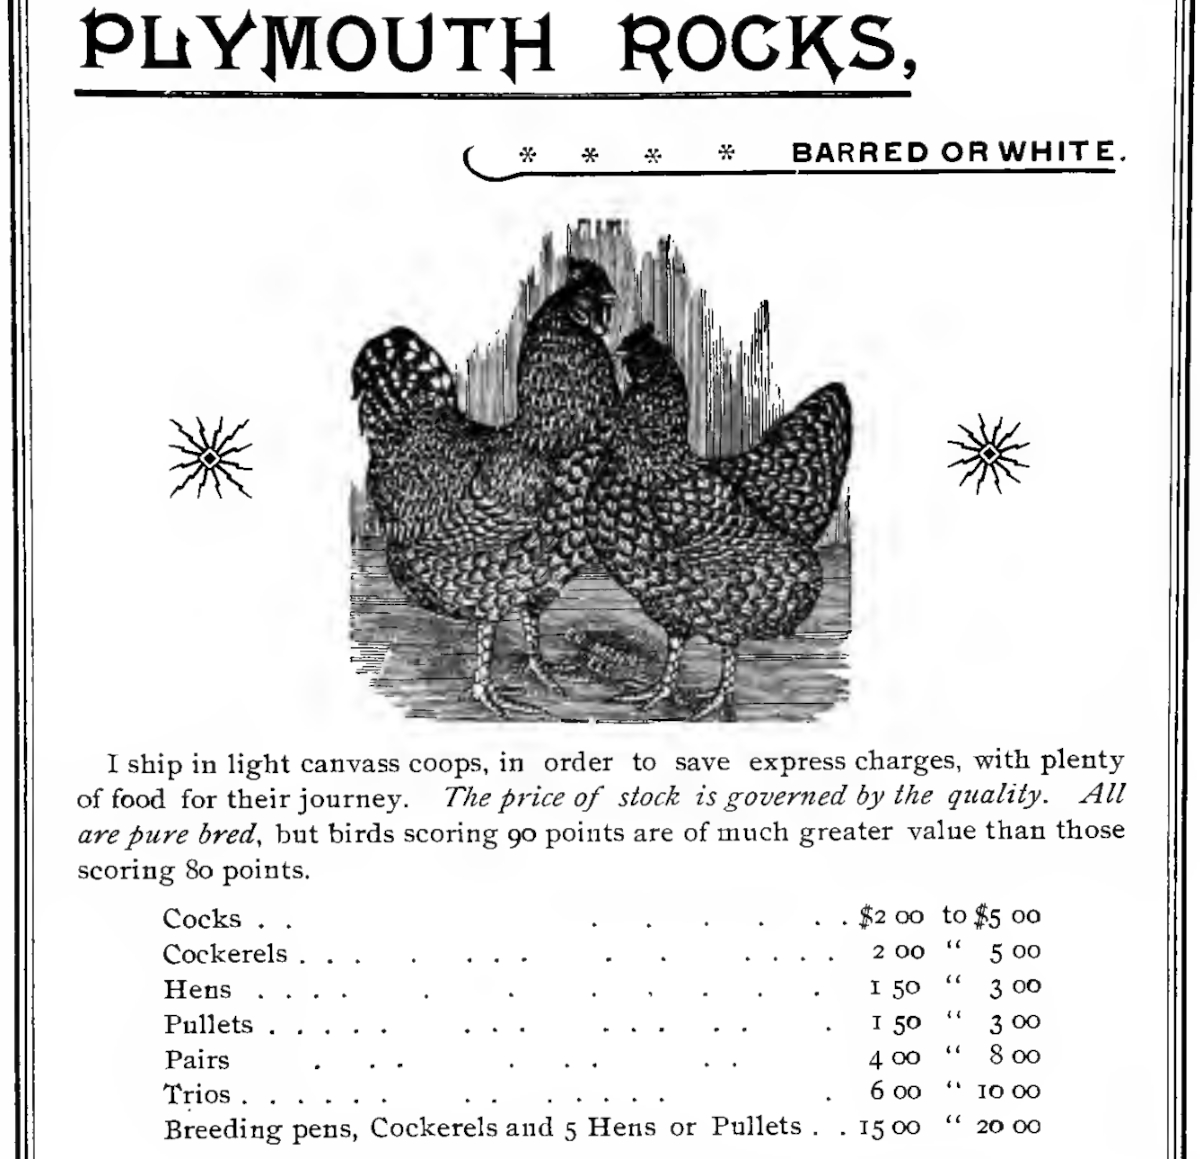 An advert for Plymouth rocks from 1921.